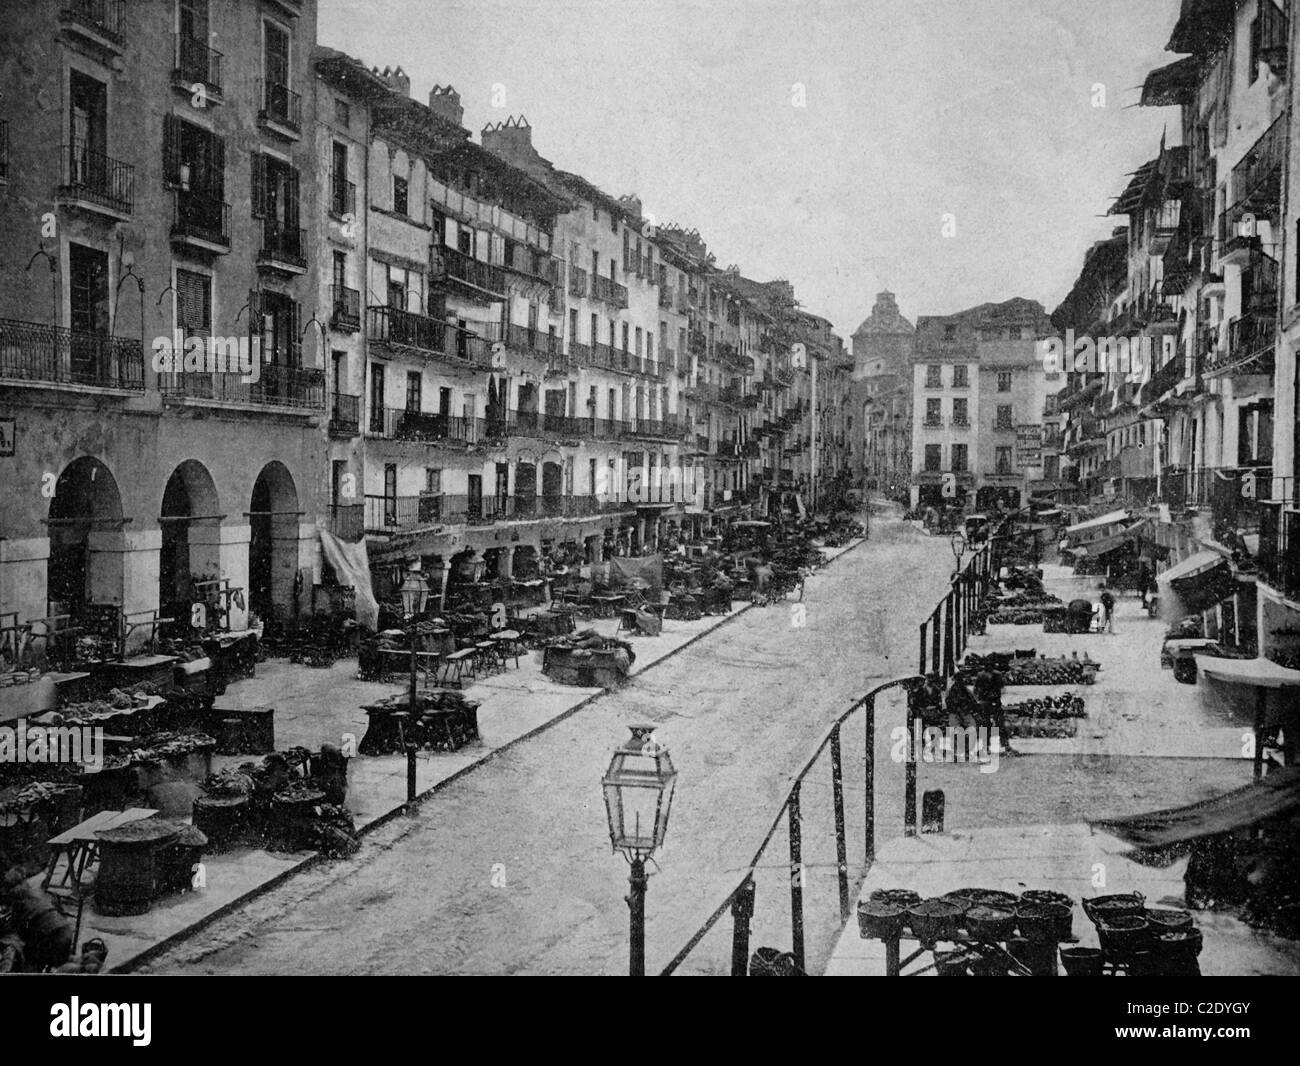 One of the first autotypes of Zaragoza, Spain, historical photograph, 1884 Stock Photo